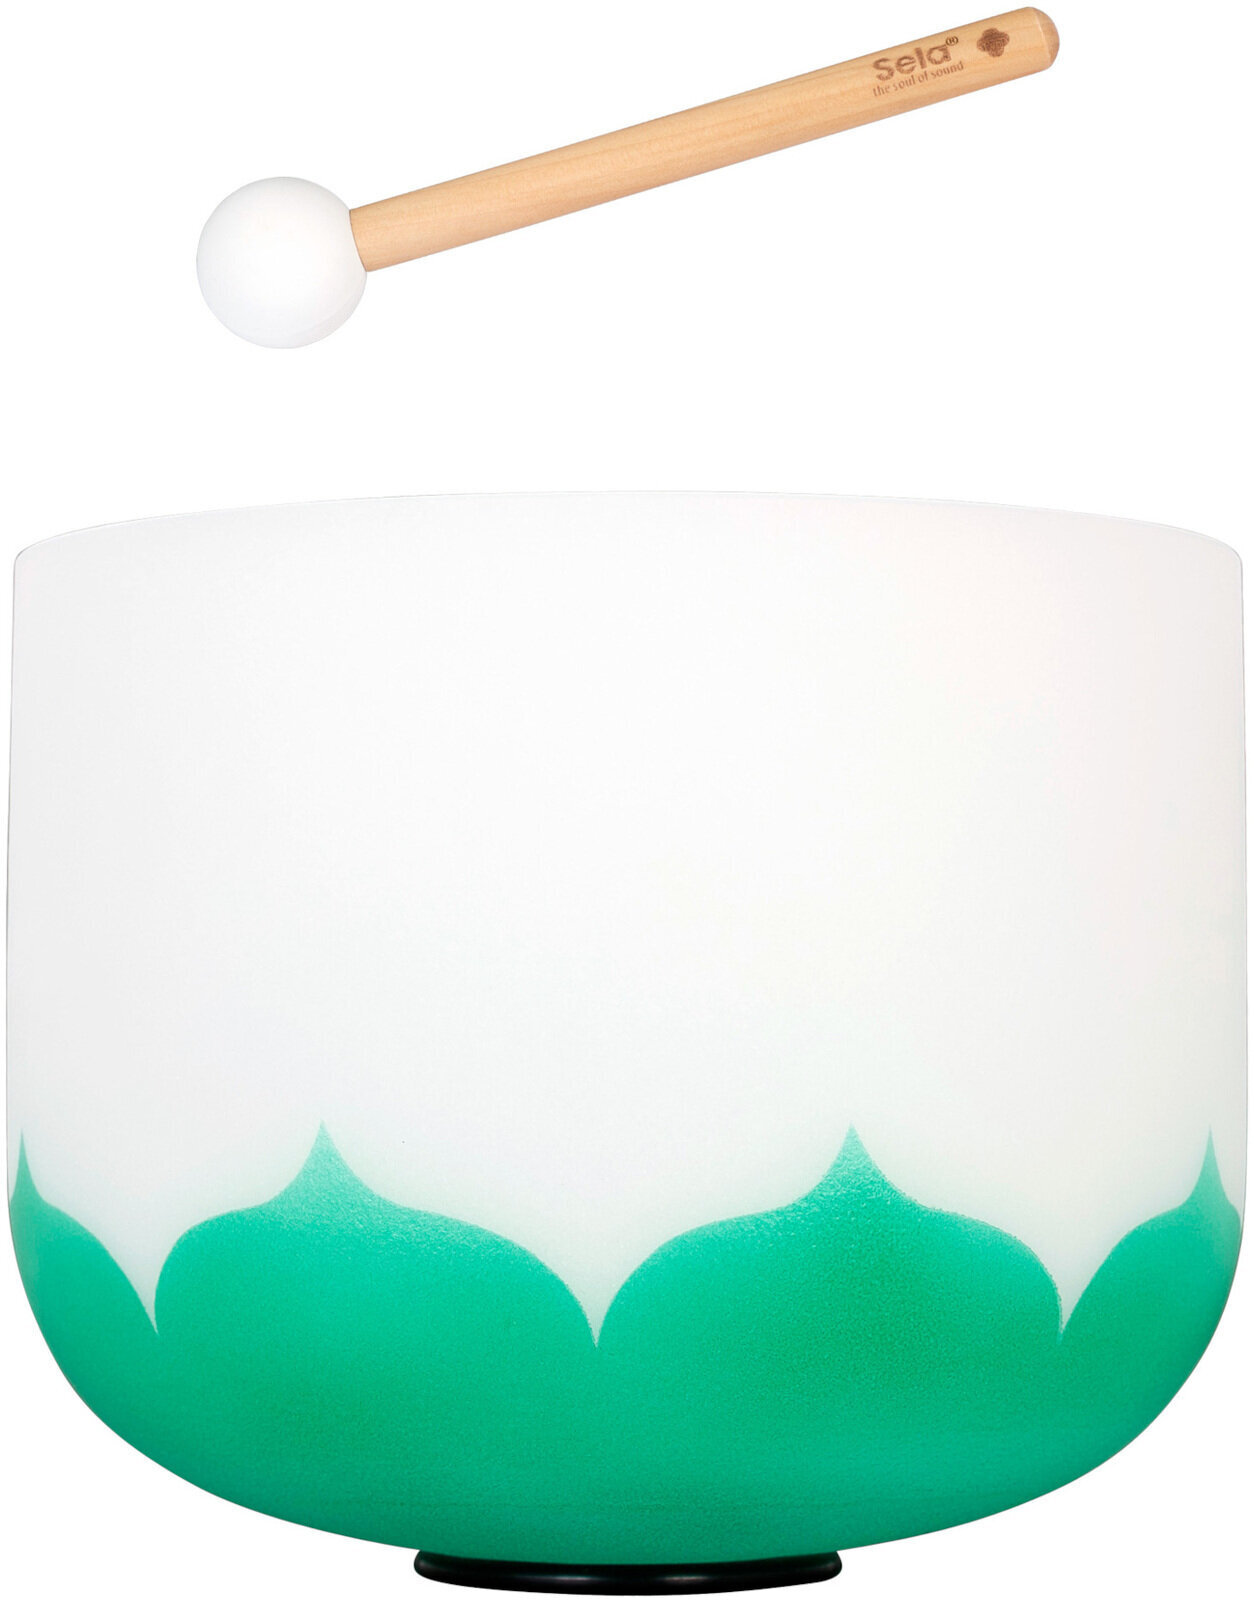 Percussion for music therapy Sela 10" Crystal Singing Bowl Lotus 432 Hz F - Green (Heart Chakra) incl. 1 Wood Mallet